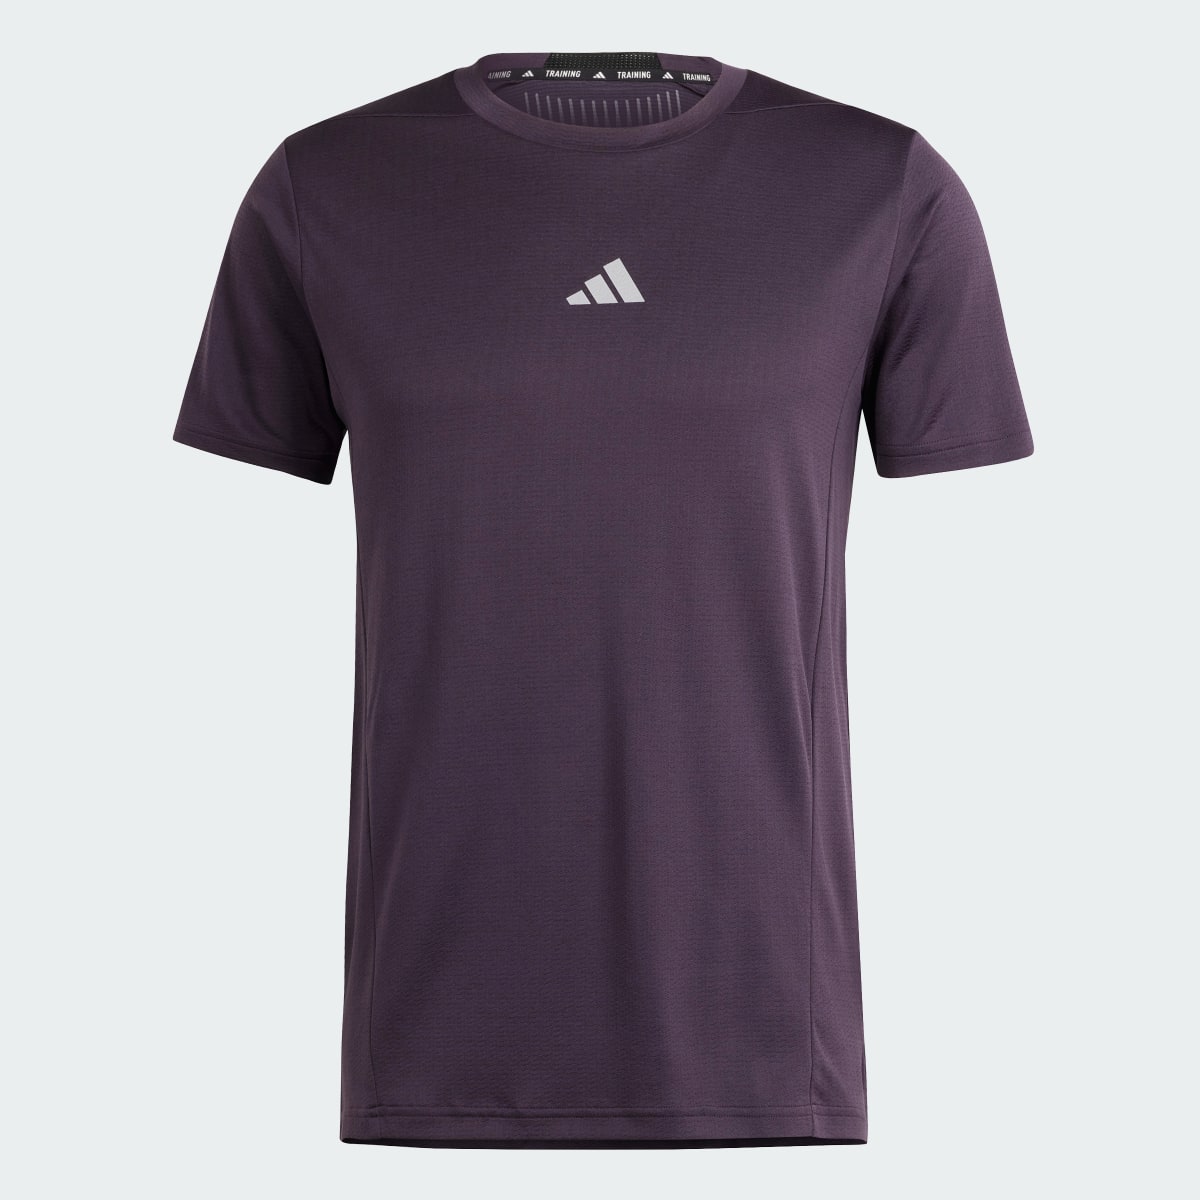 Adidas Designed for Training HIIT Workout HEAT.RDY Tee. 5